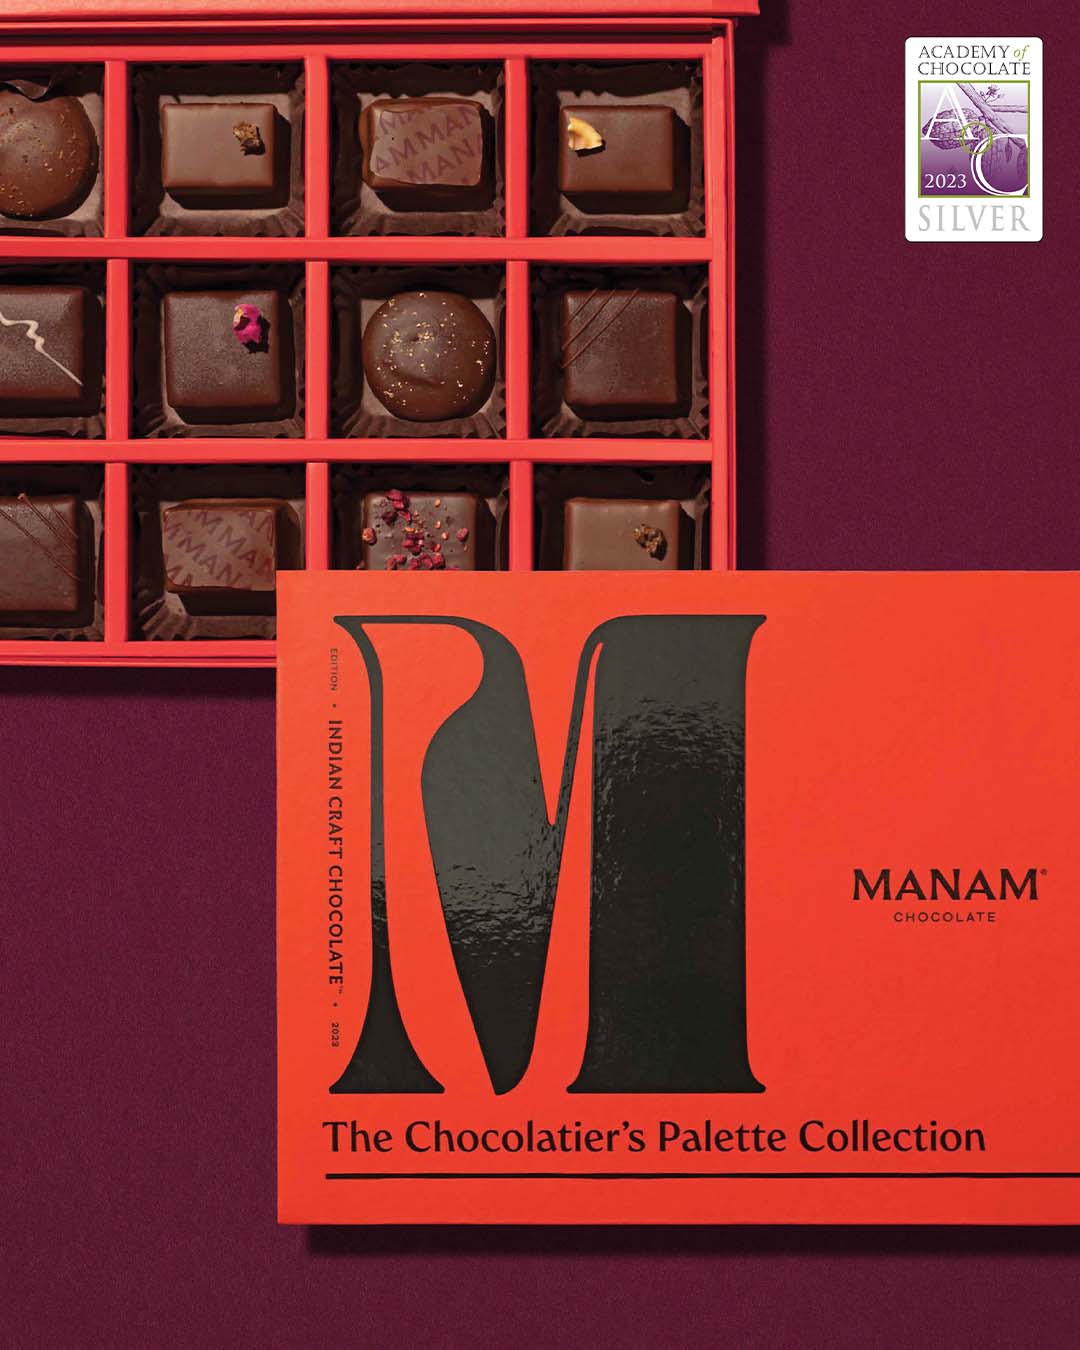 The Chocolatier's Palette Selection